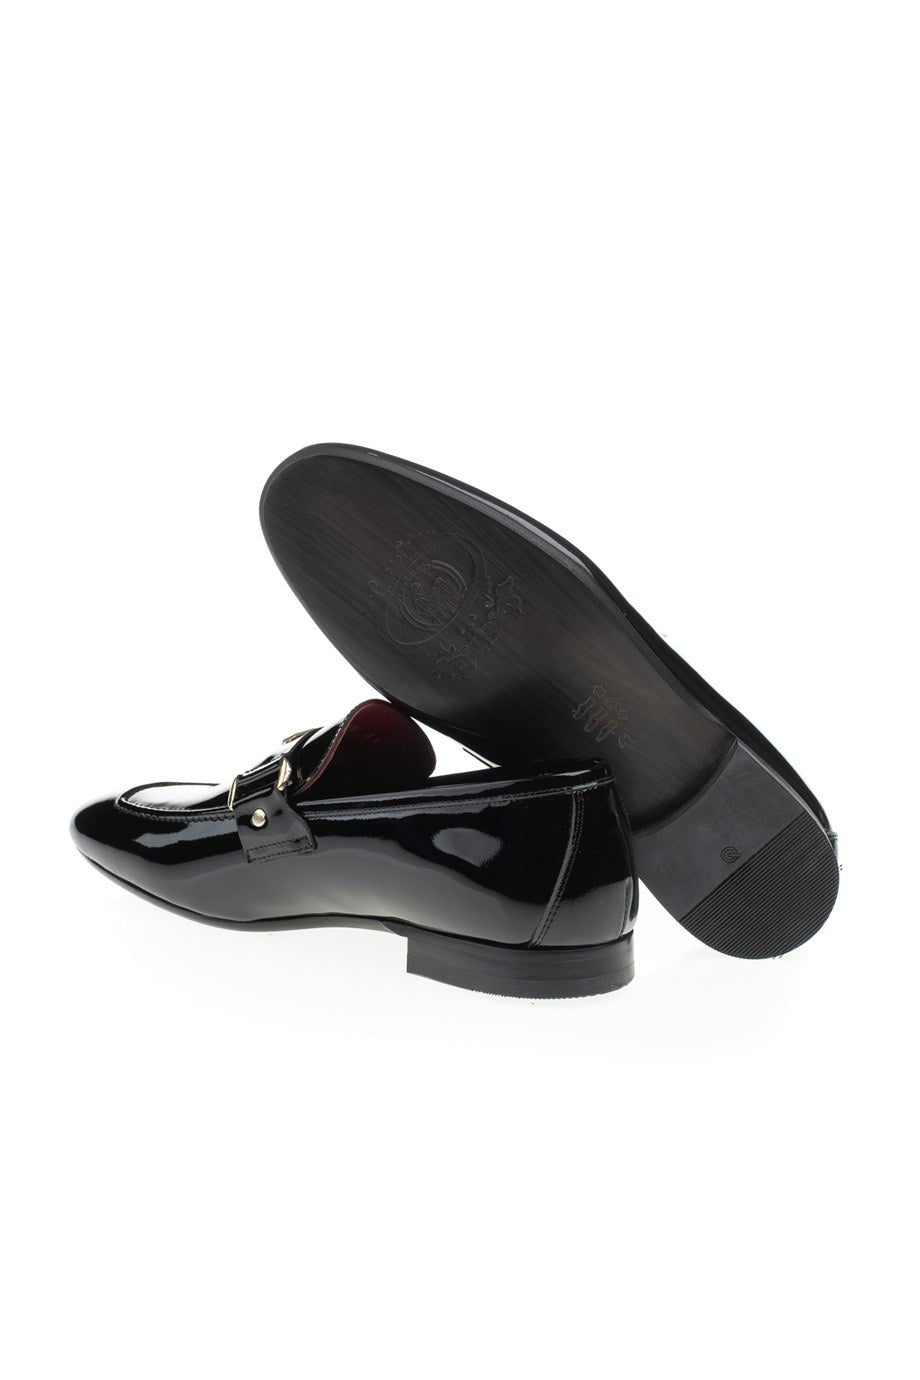 Neolite Sole Patent Leather Shoes - MENSTYLEWITH